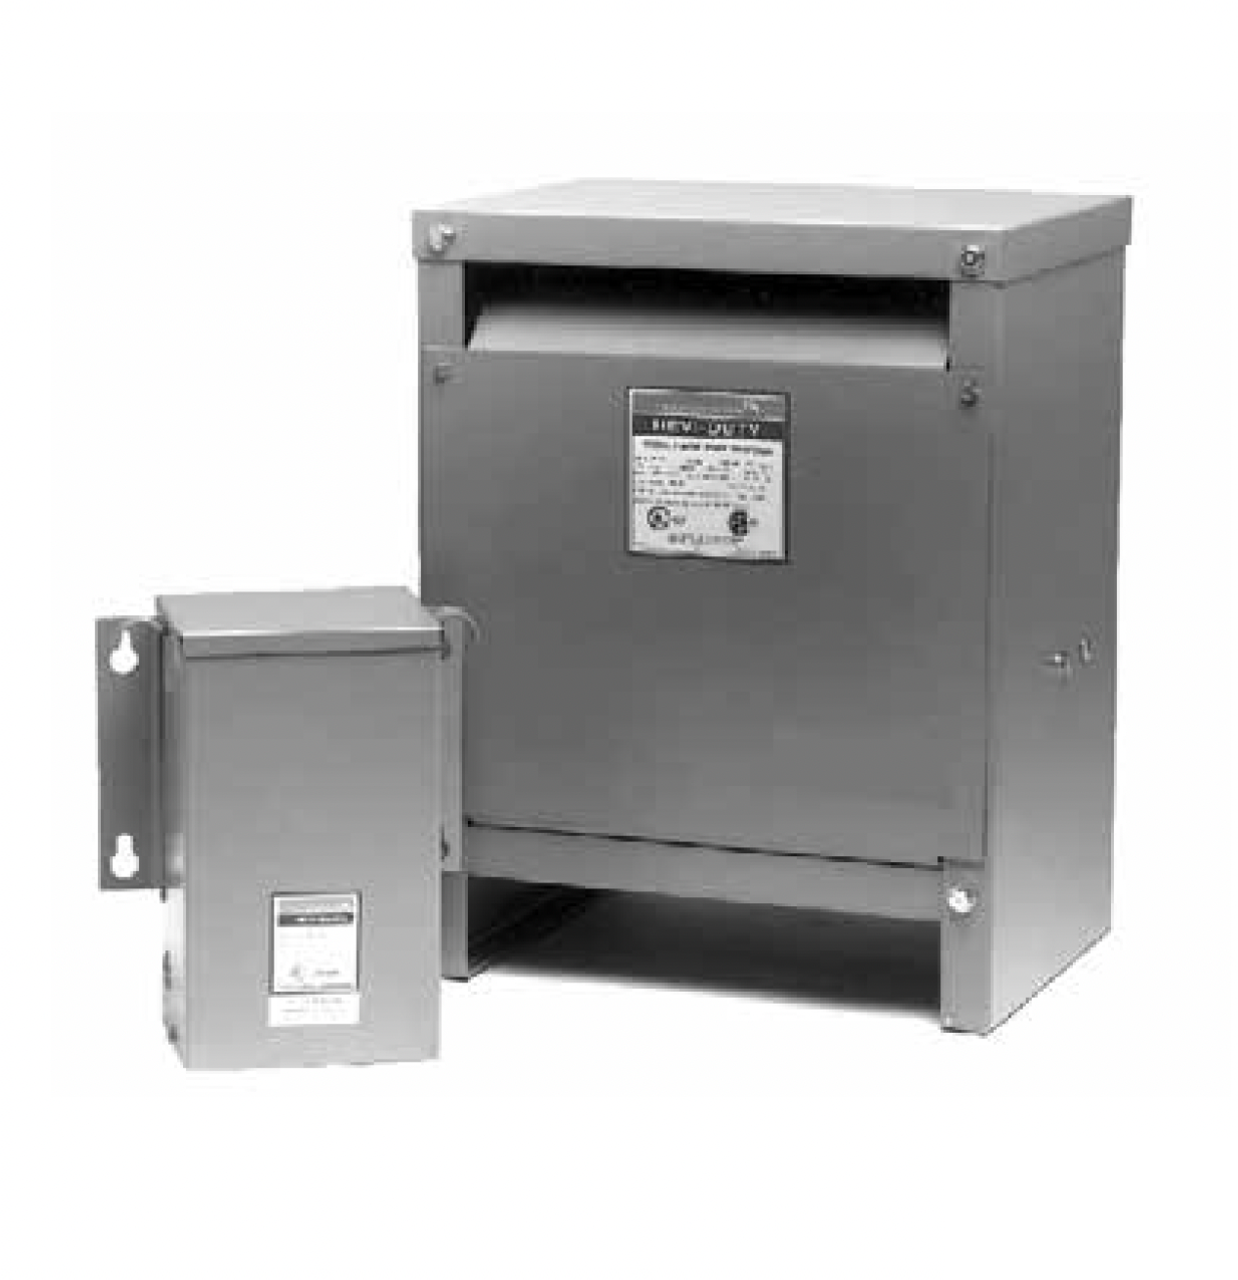 SolaHD Emerson - DT661H27S Dry-Type Distribution Transformers